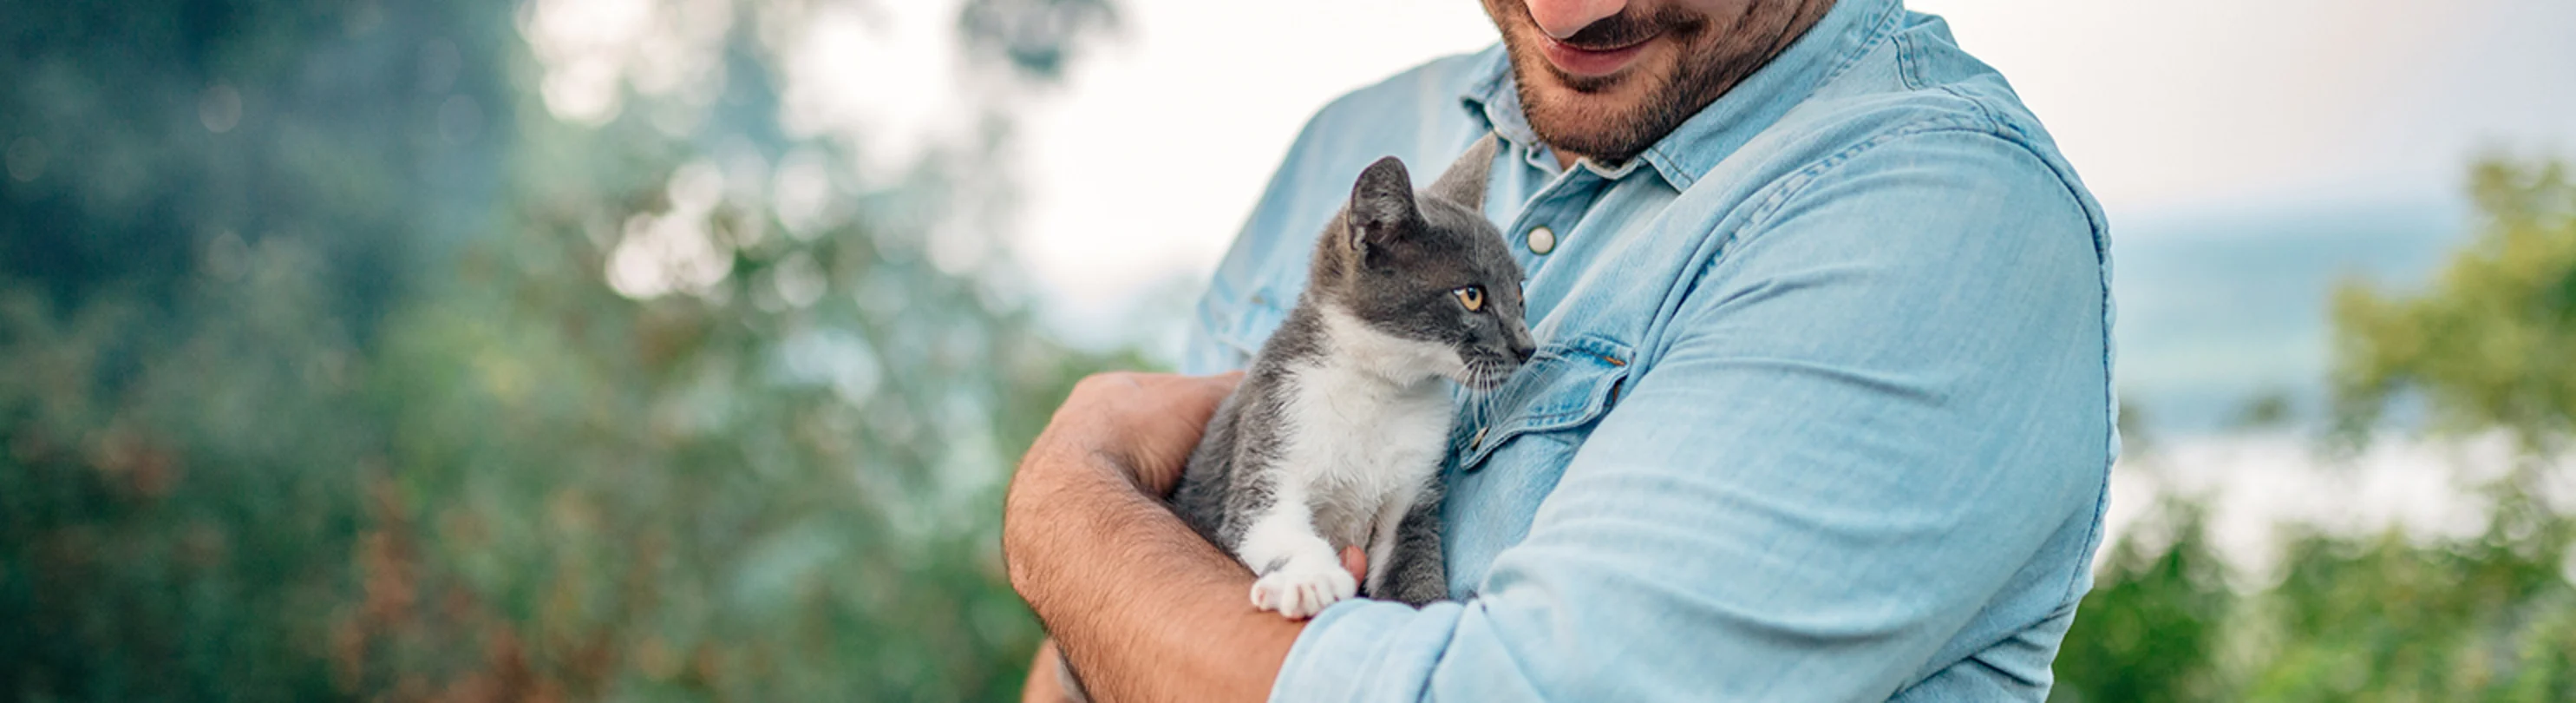 A person holding a kitten